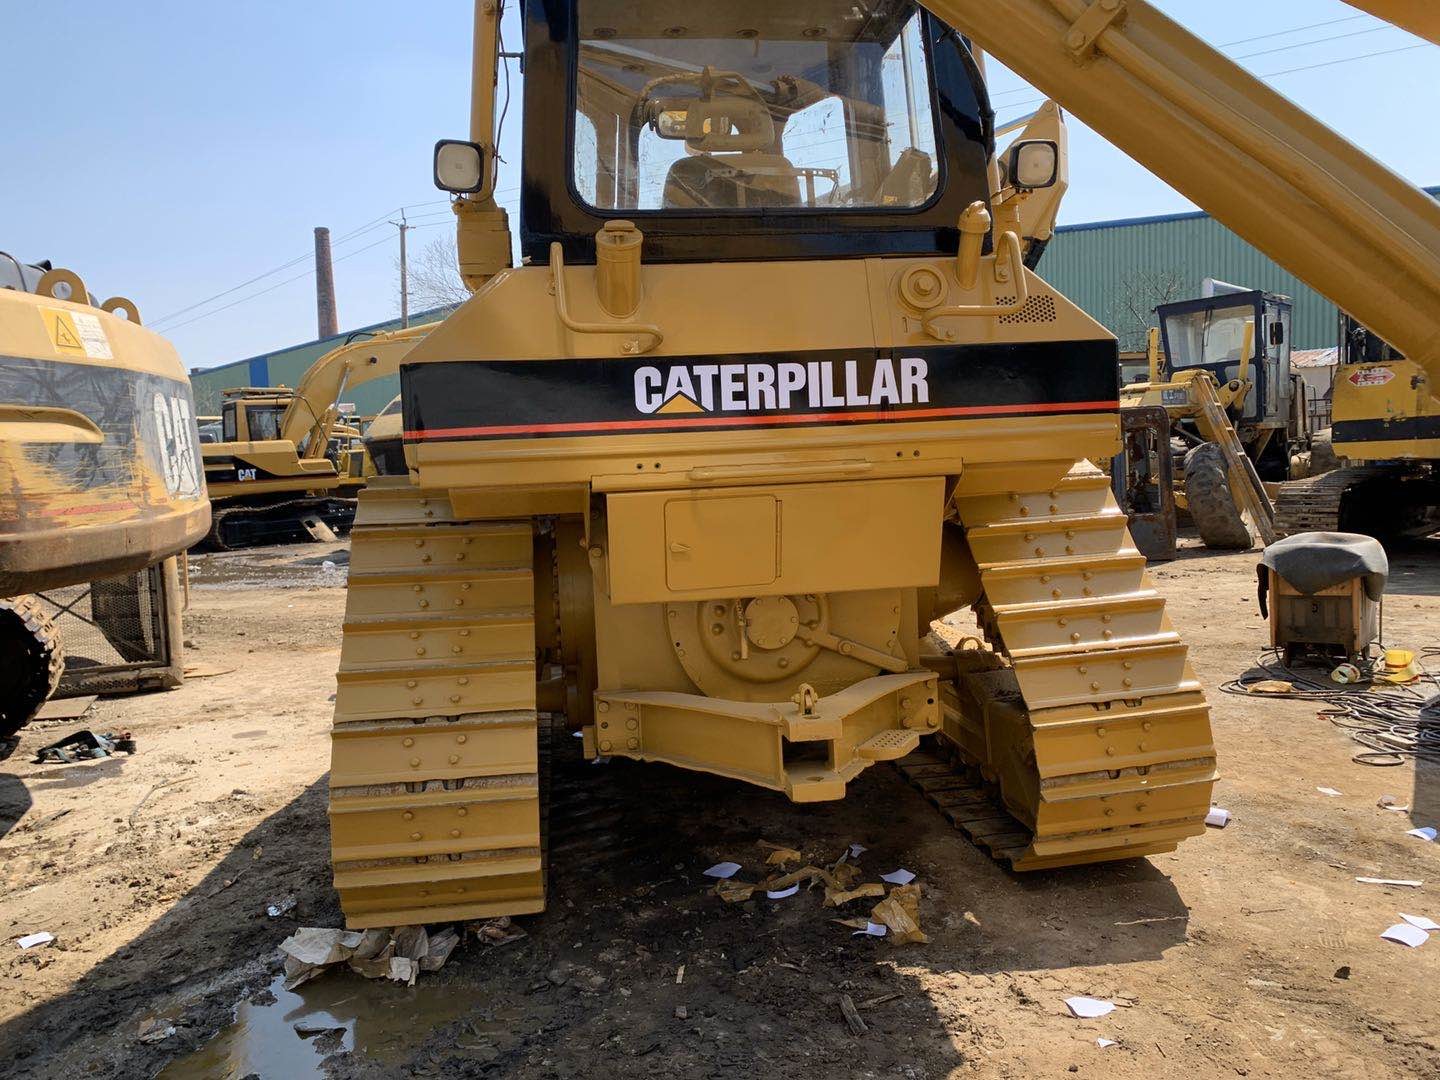 Quality Repaint Color Used CAT D5M Bulldozer For Sale/6 Way Blade Used Caterpillar D5M Bulldozer for sale